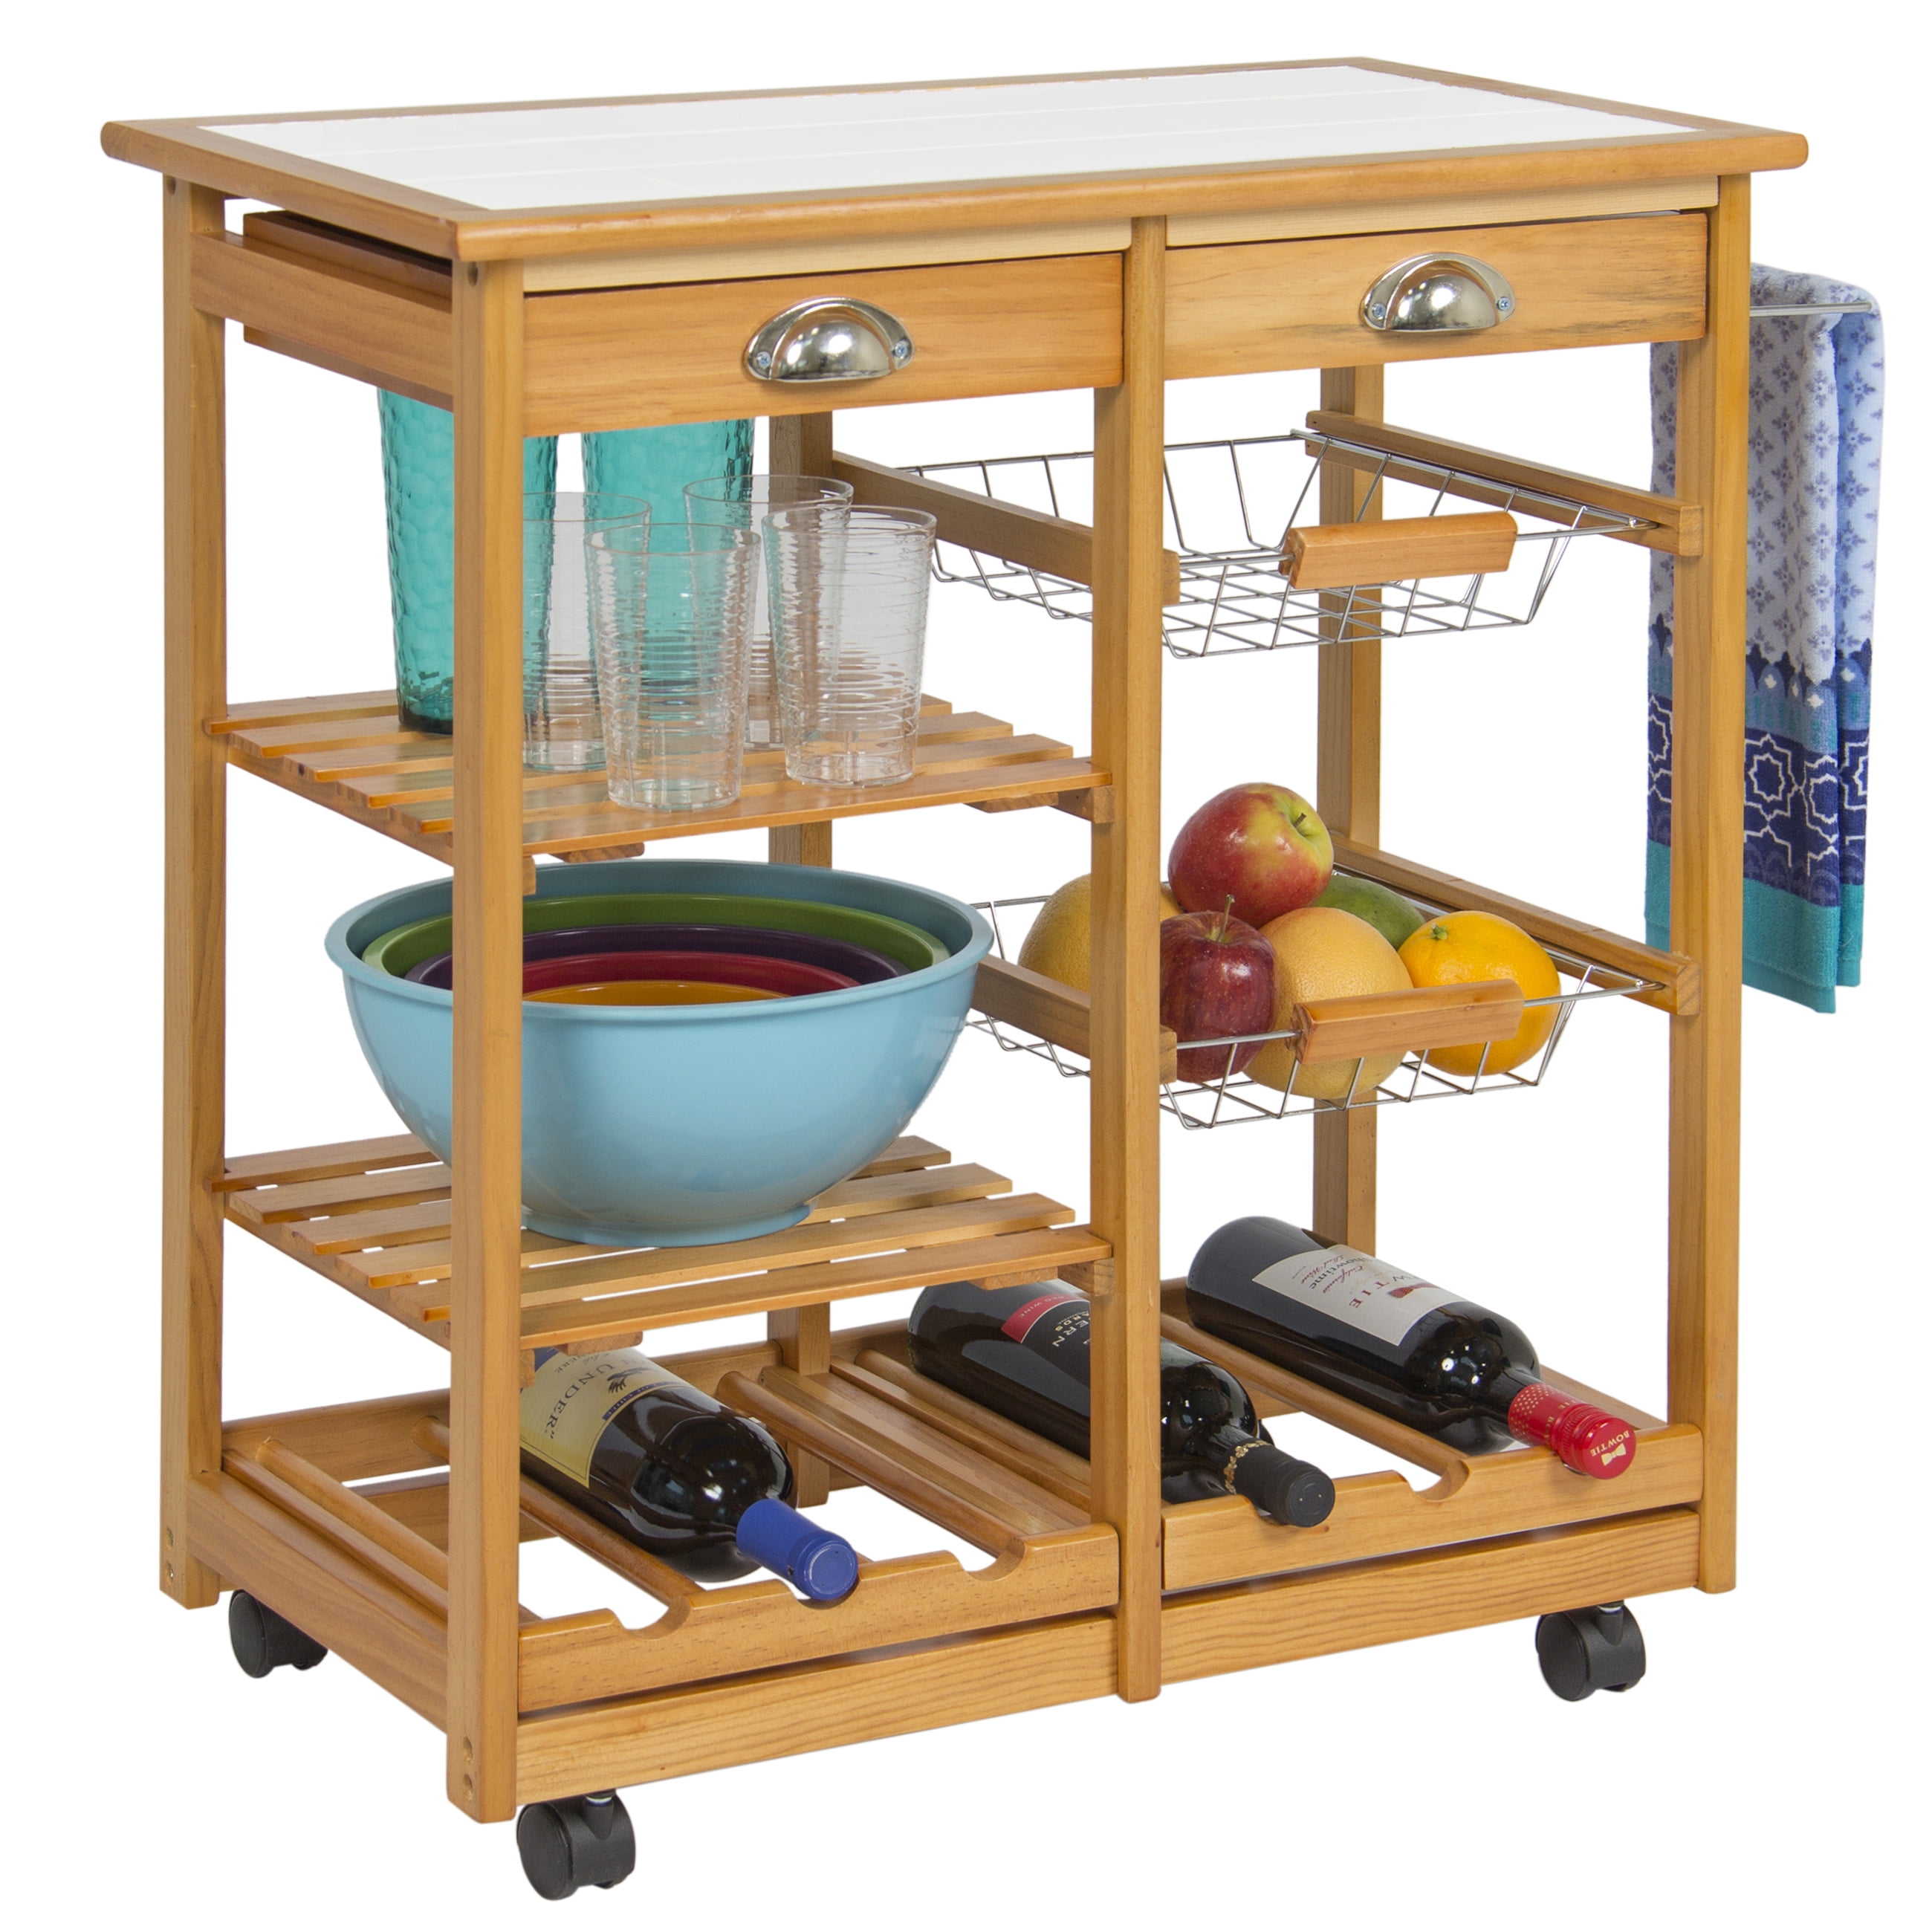 Wheeled Wooden Kitchen Island with a Shelf for Plates and Wine Bottle Rack Relaxdays JAMES Bamboo Serving Trolley Cart with 2 Drawers and 3 Baskets Natural 80 x 67 x 37 cm XXL